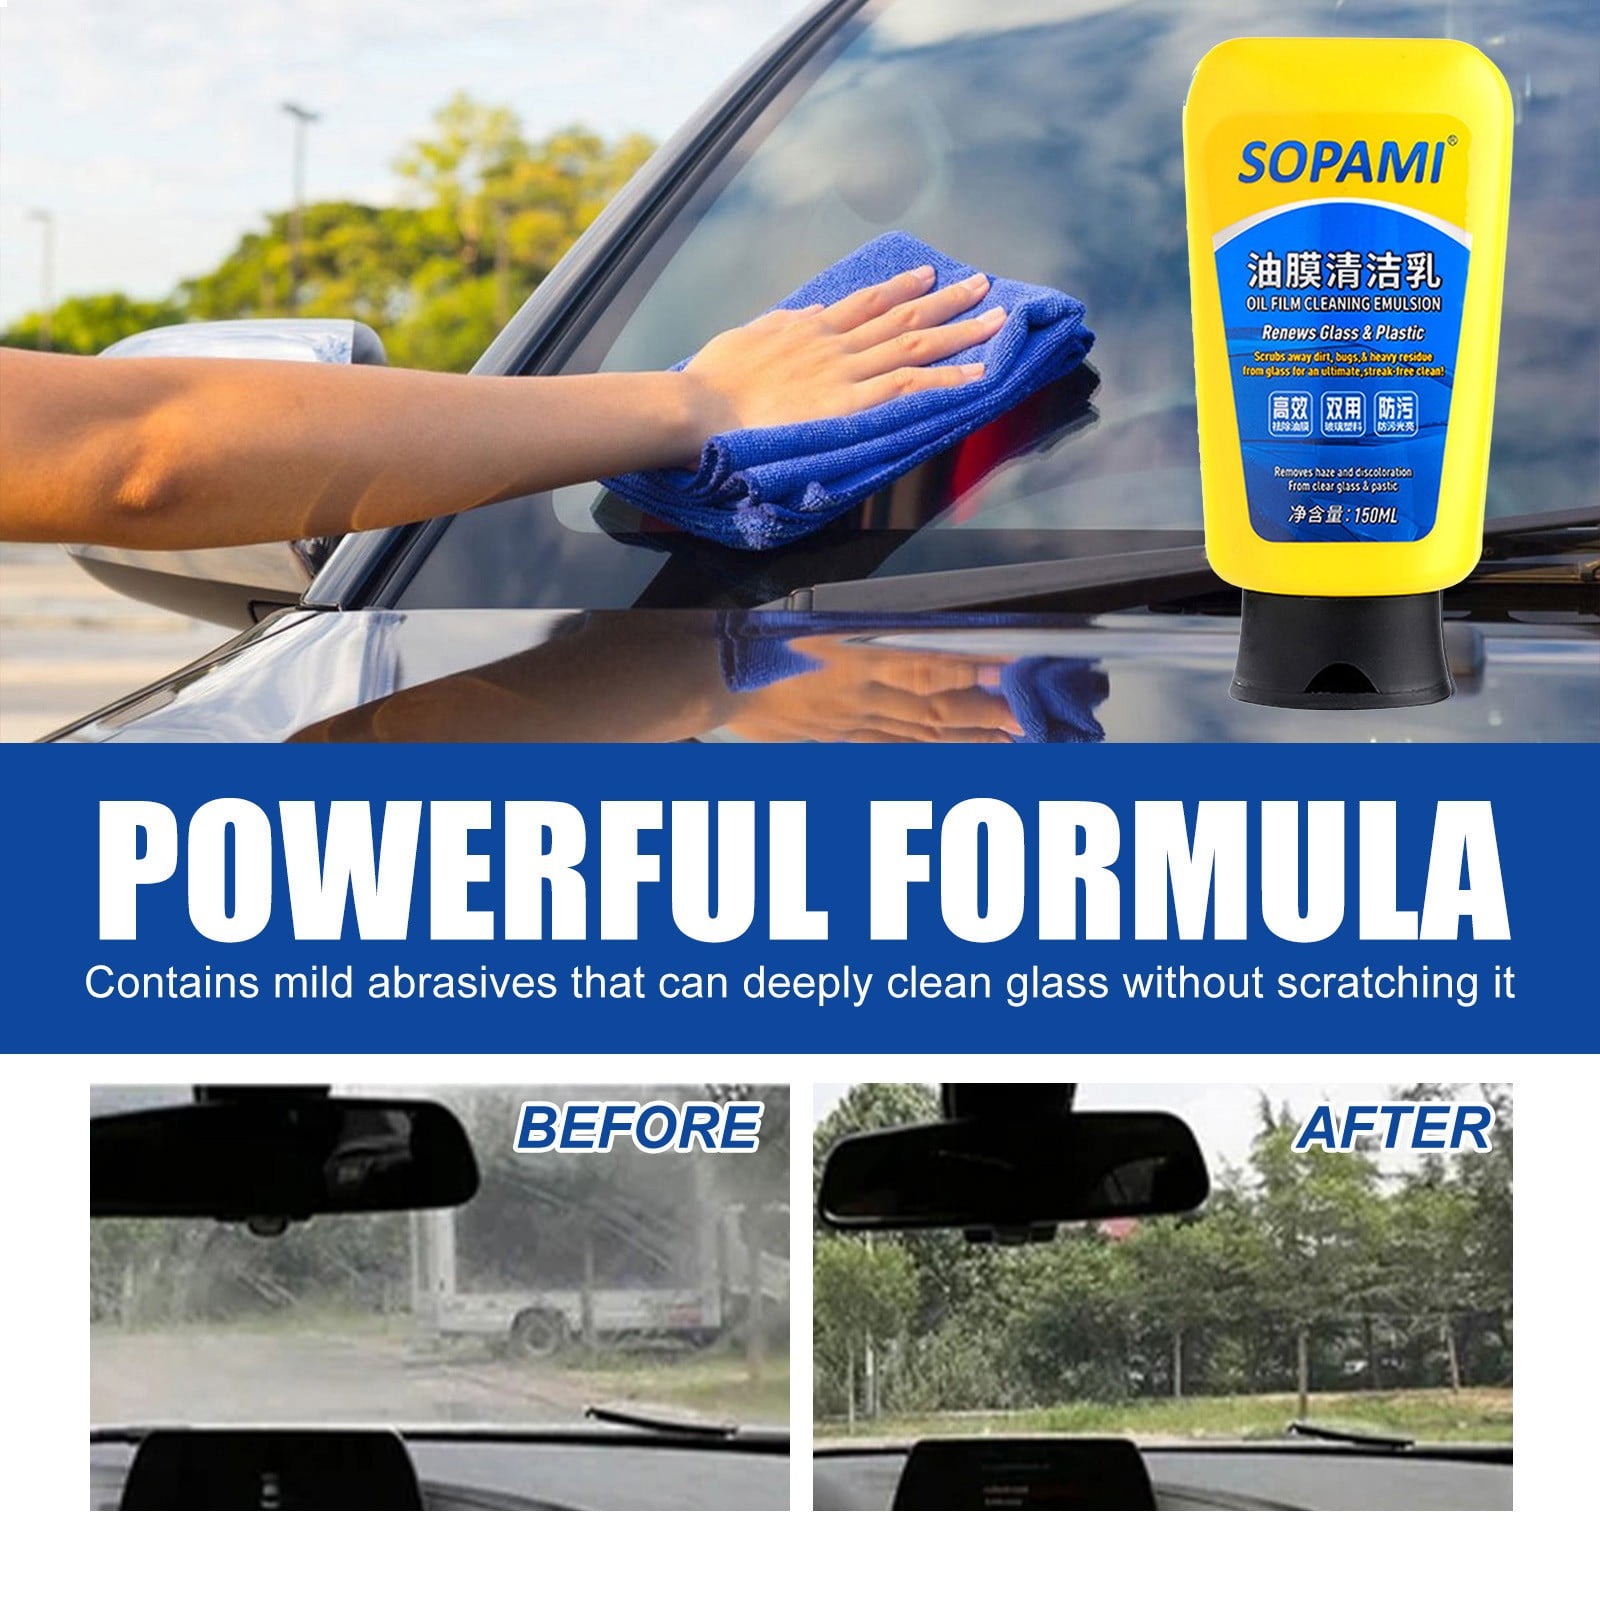  DENGWANG Sopami Oil Film Cleaning Emulsion, Sopami Oil Film  Emulsion Glass Cleaner, Sopami Automotive Glass Oil Film Remover, Sopami  Car Coating Spray for Quick Stain Remover (2 Pcs) : Health 